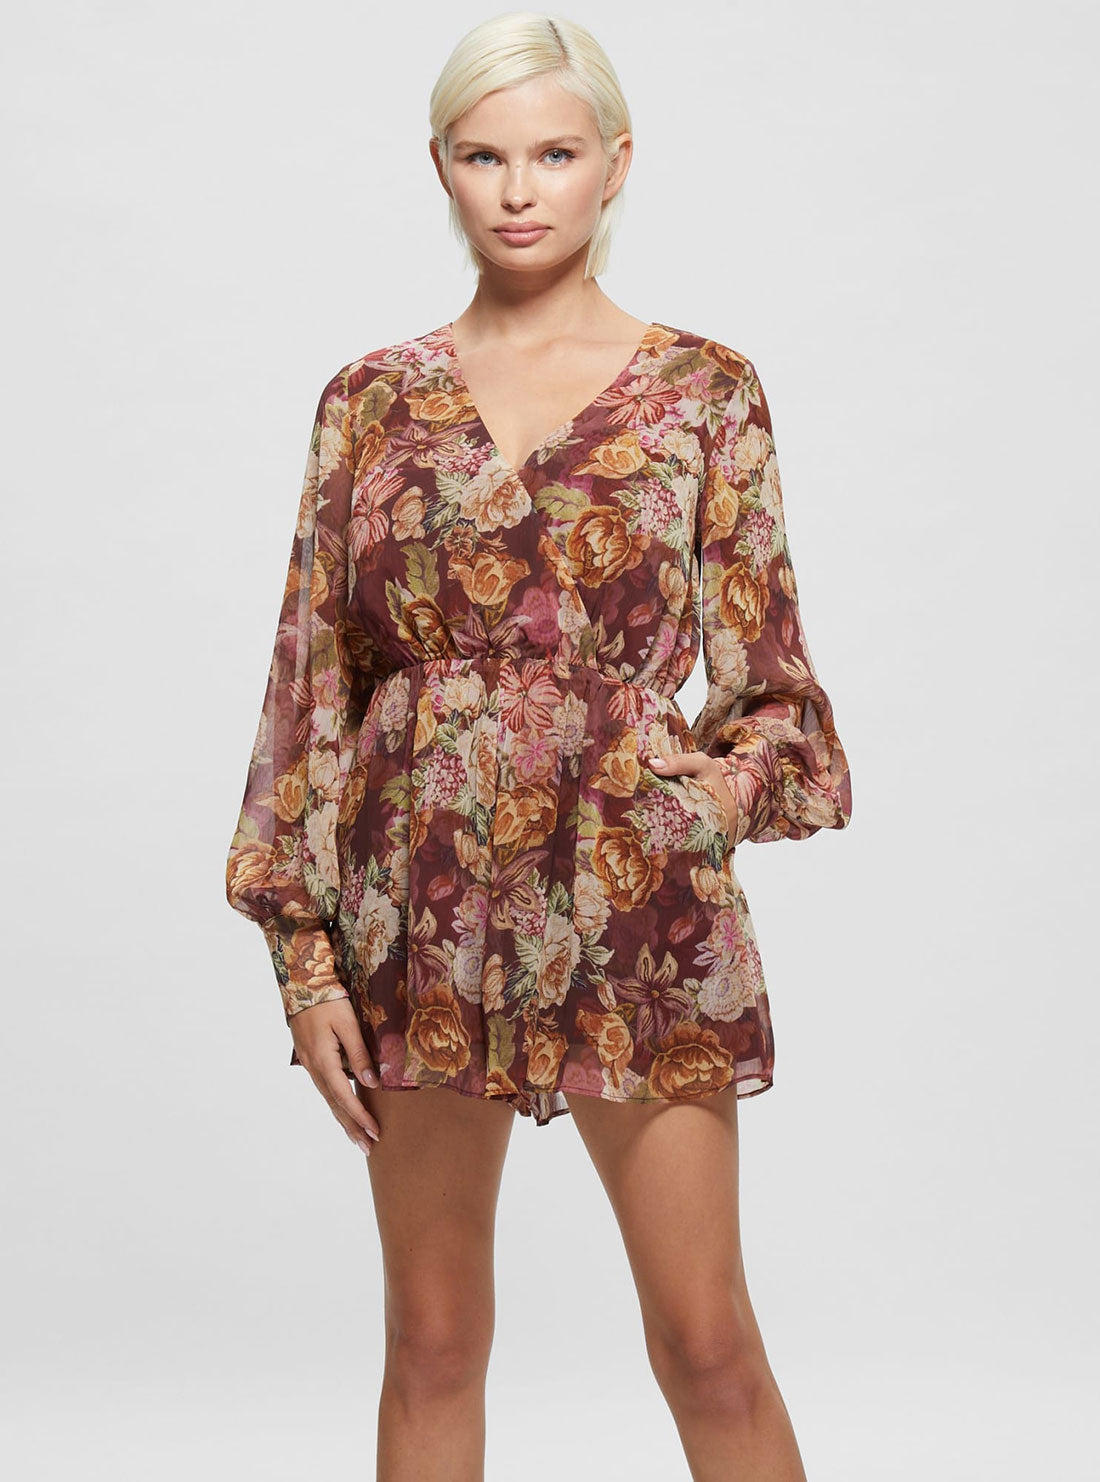 GUESS Women's Eco Floral Tapestry Print Candis Romper W3RD28WDWT2 Front View